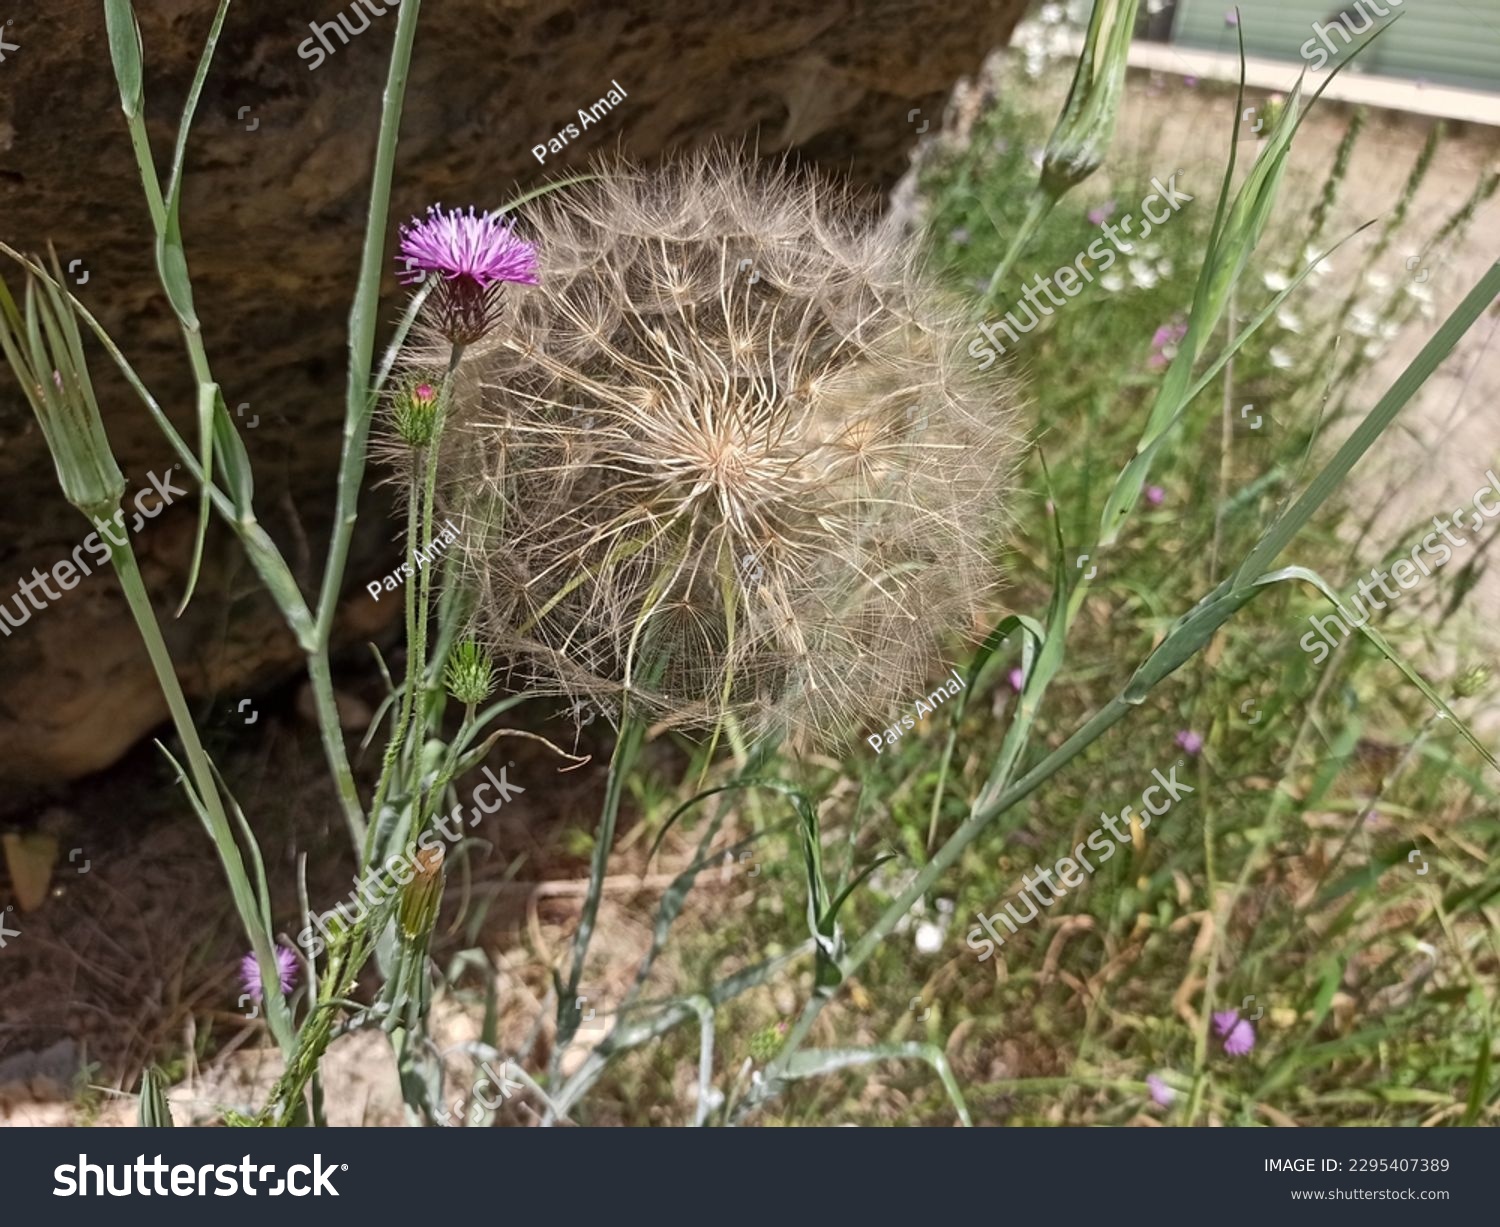 Dicots, salsifies, Tragopogon, Cichorieae, Cichorioideae, Asteraceae, Asterales, Asterids, Eudicots, Flowering plants, Vascular plants, Plants, Tragopogon porrifolius, Asteraceae, Asterales, eudicots #2295407389